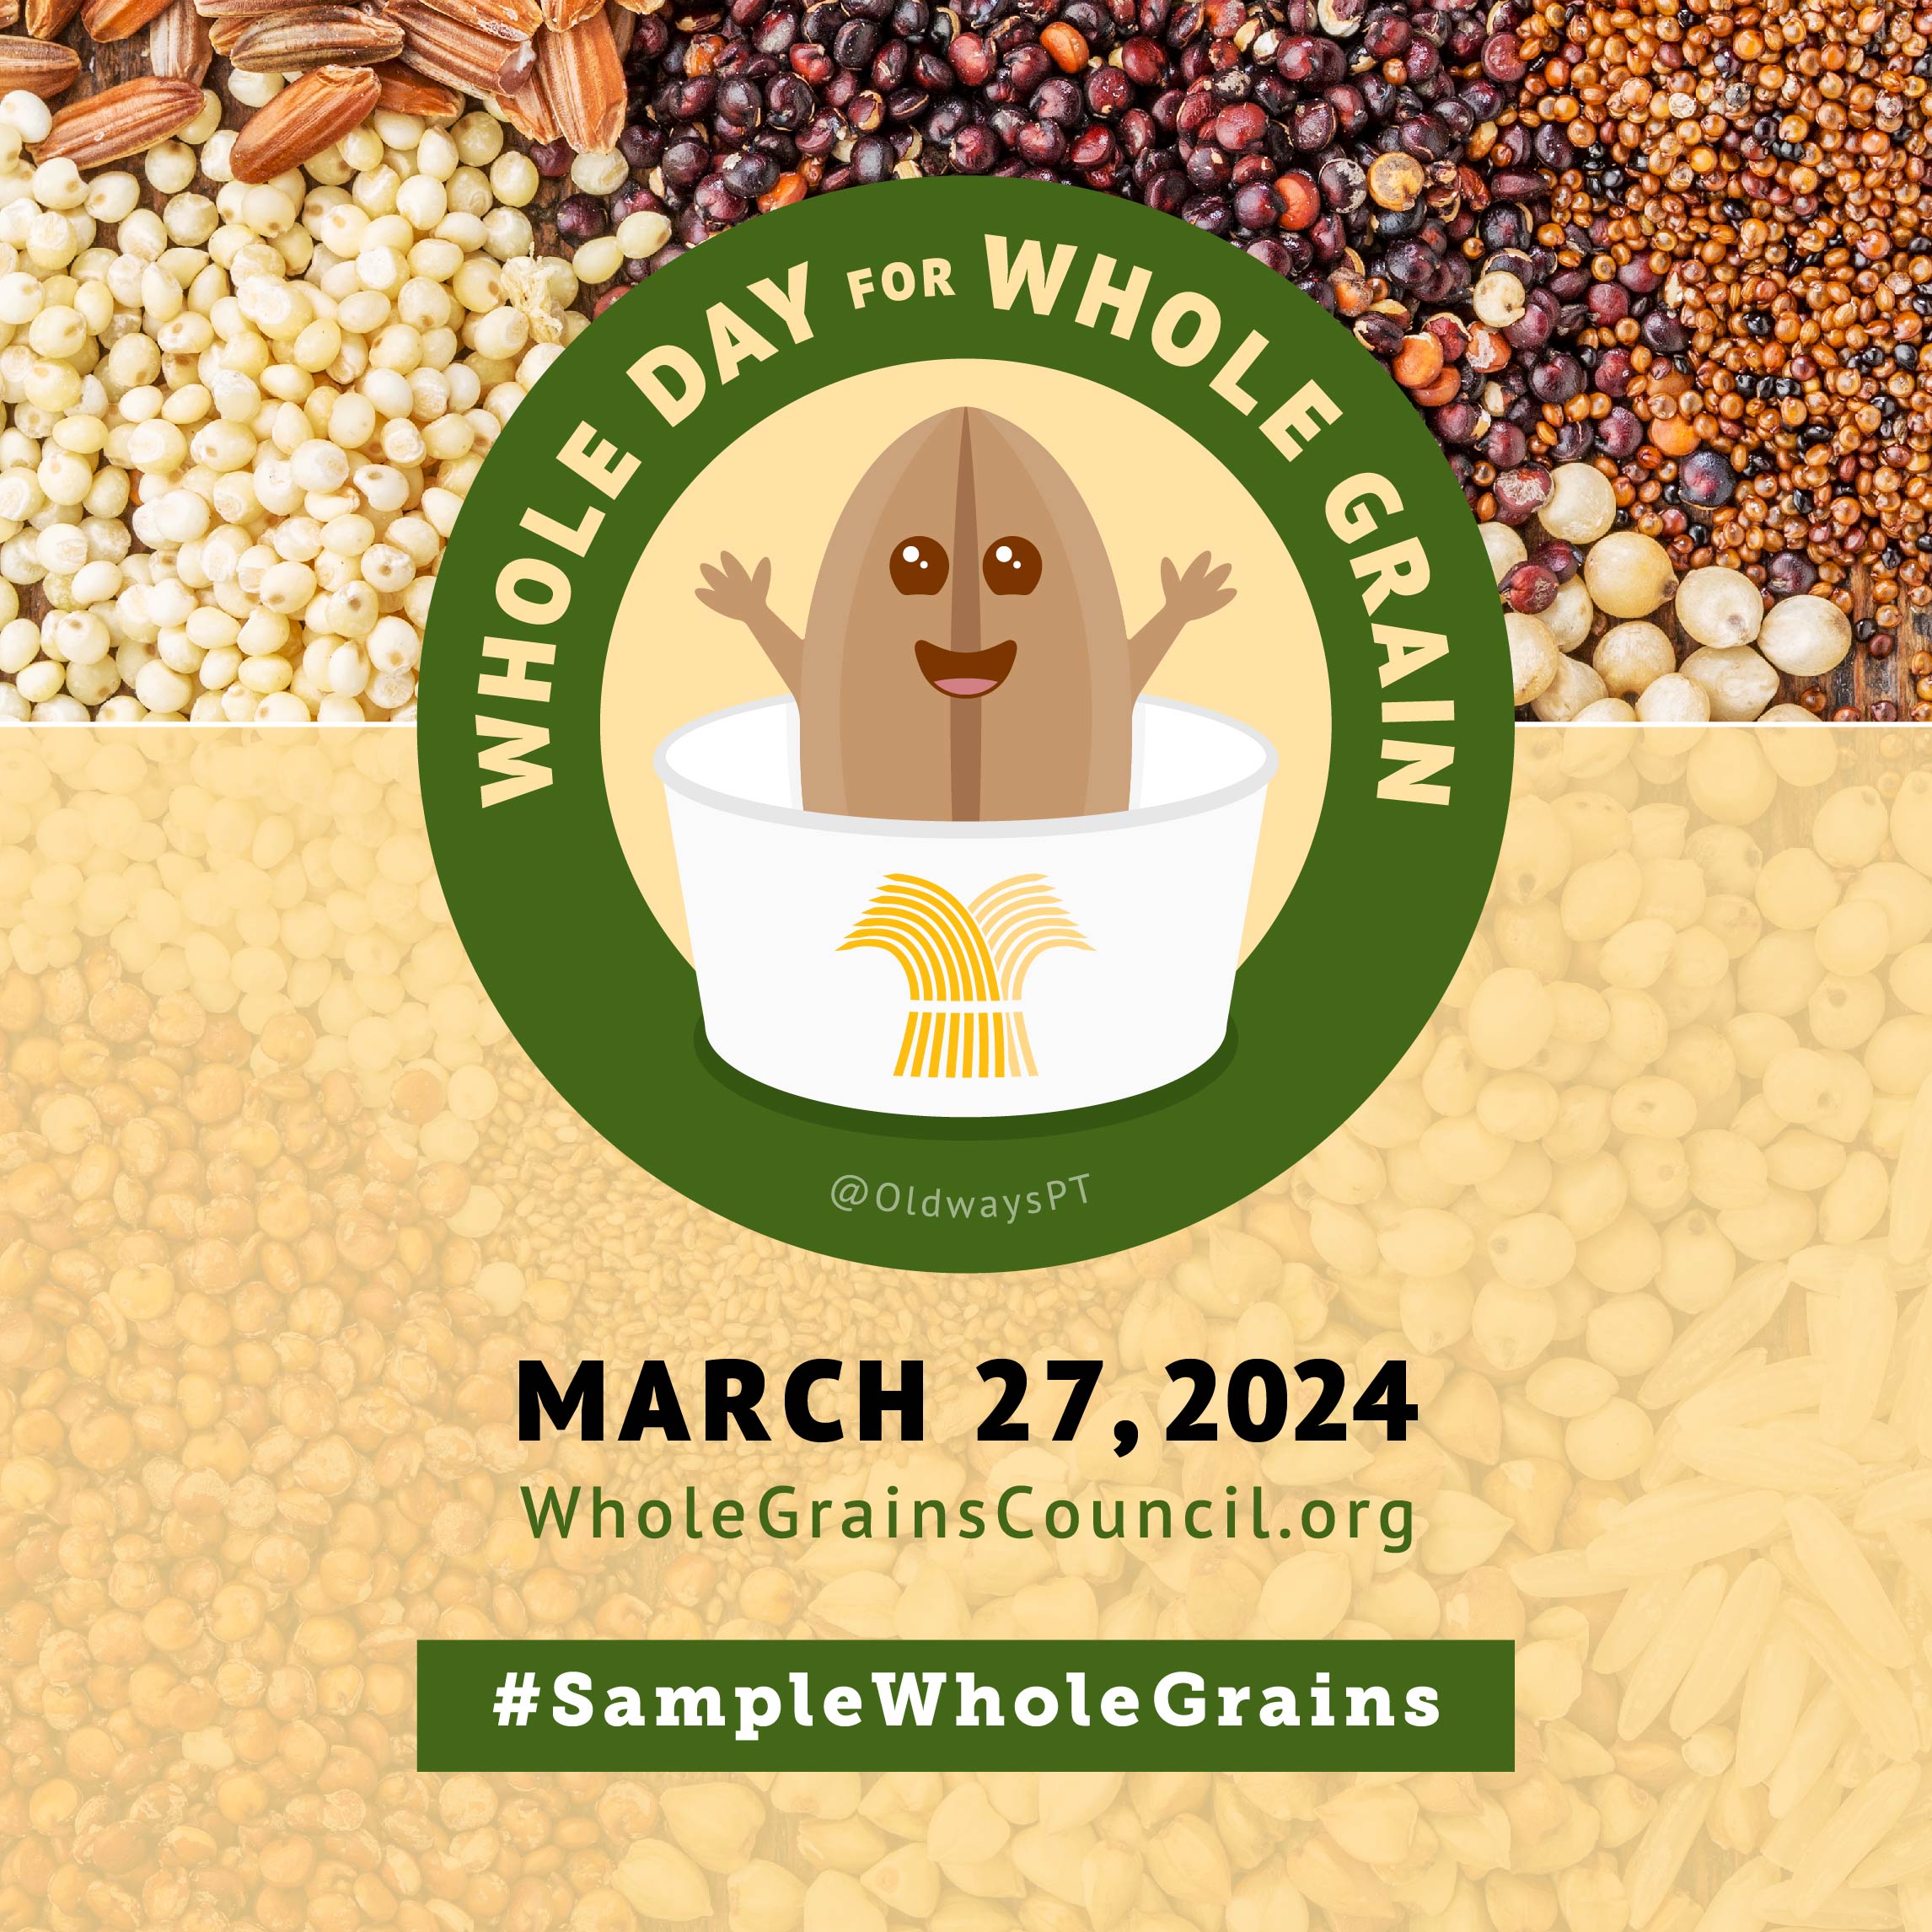 mascot graphic for Whole Day for Whole Grain